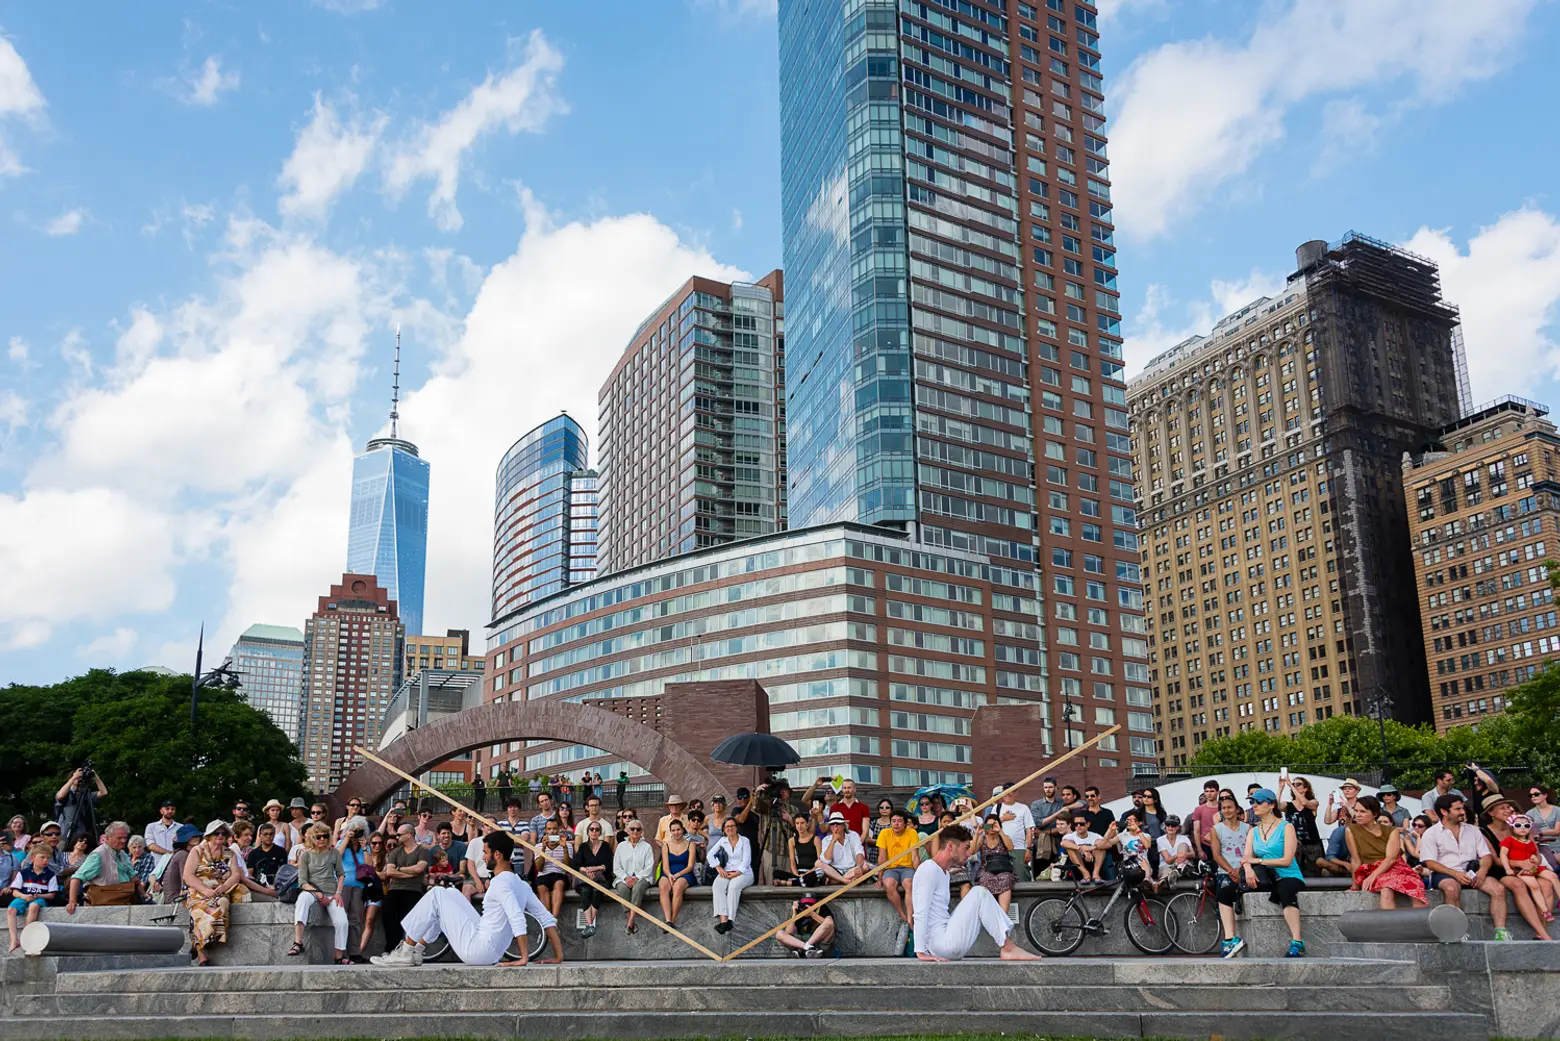 How the Lower Manhattan Cultural Council has kept art thriving through FiDi’s ups and downs